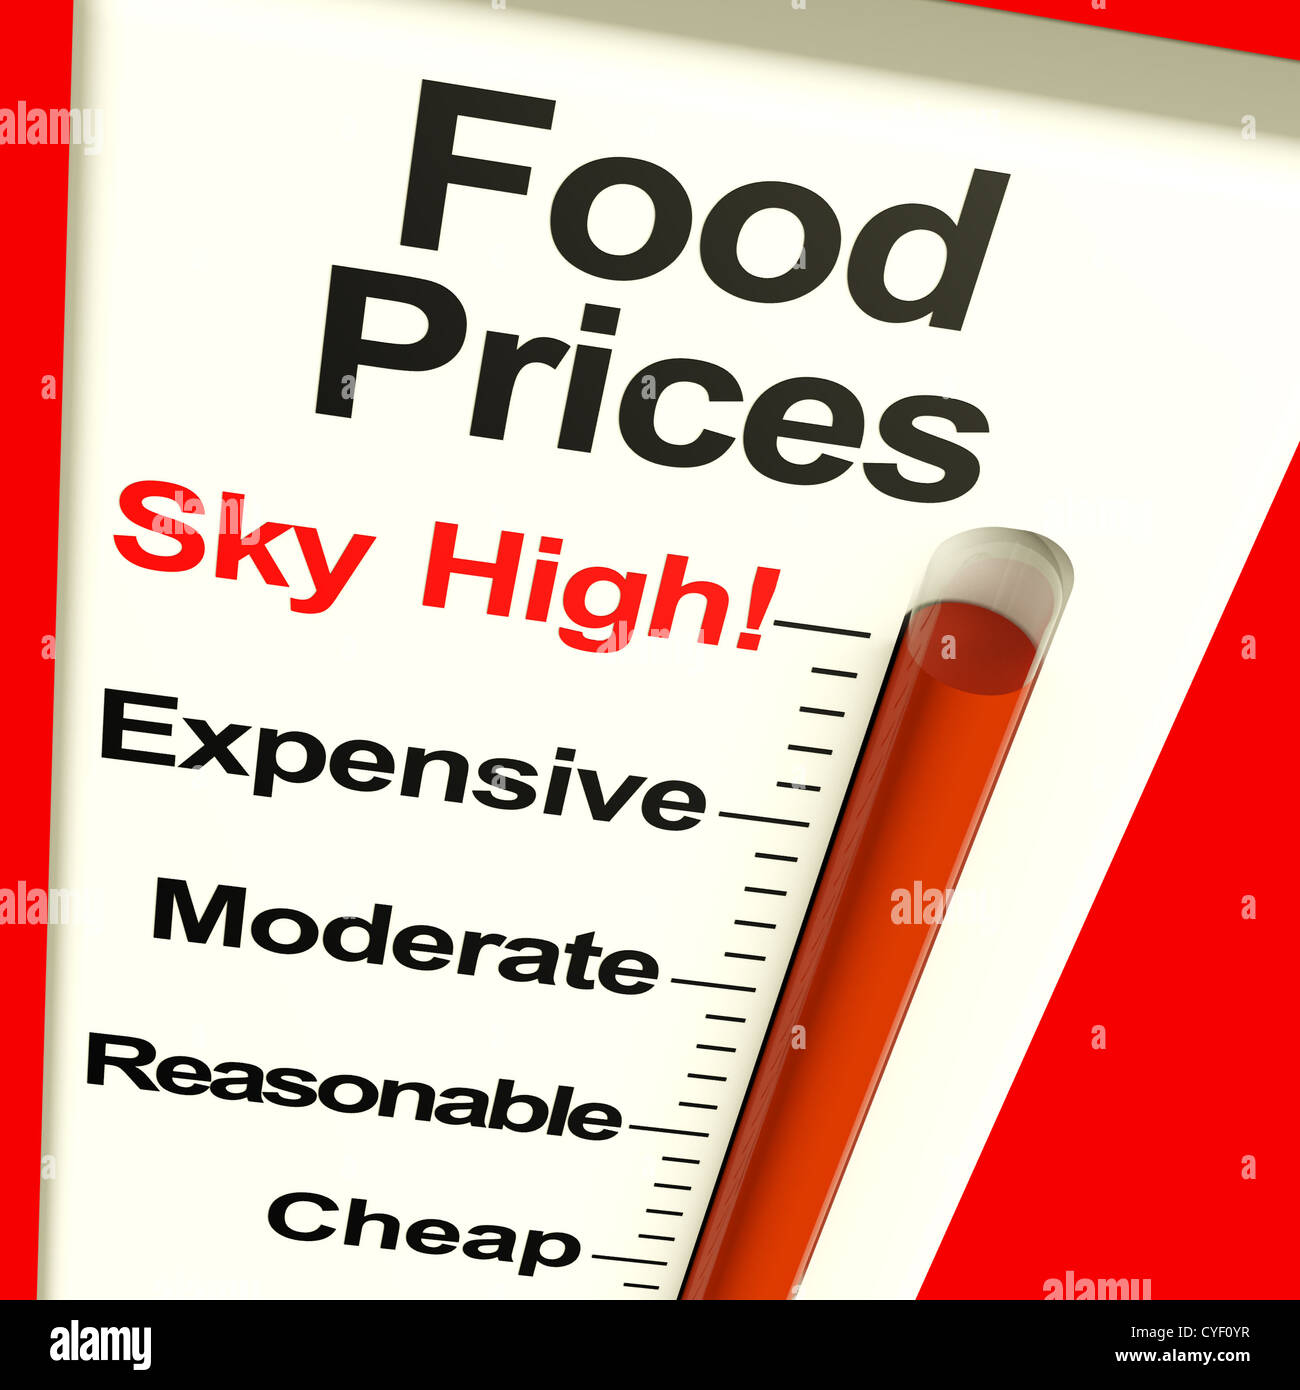 Food Prices High Monitor Showing Expensive Grocery Cost Stock Photo